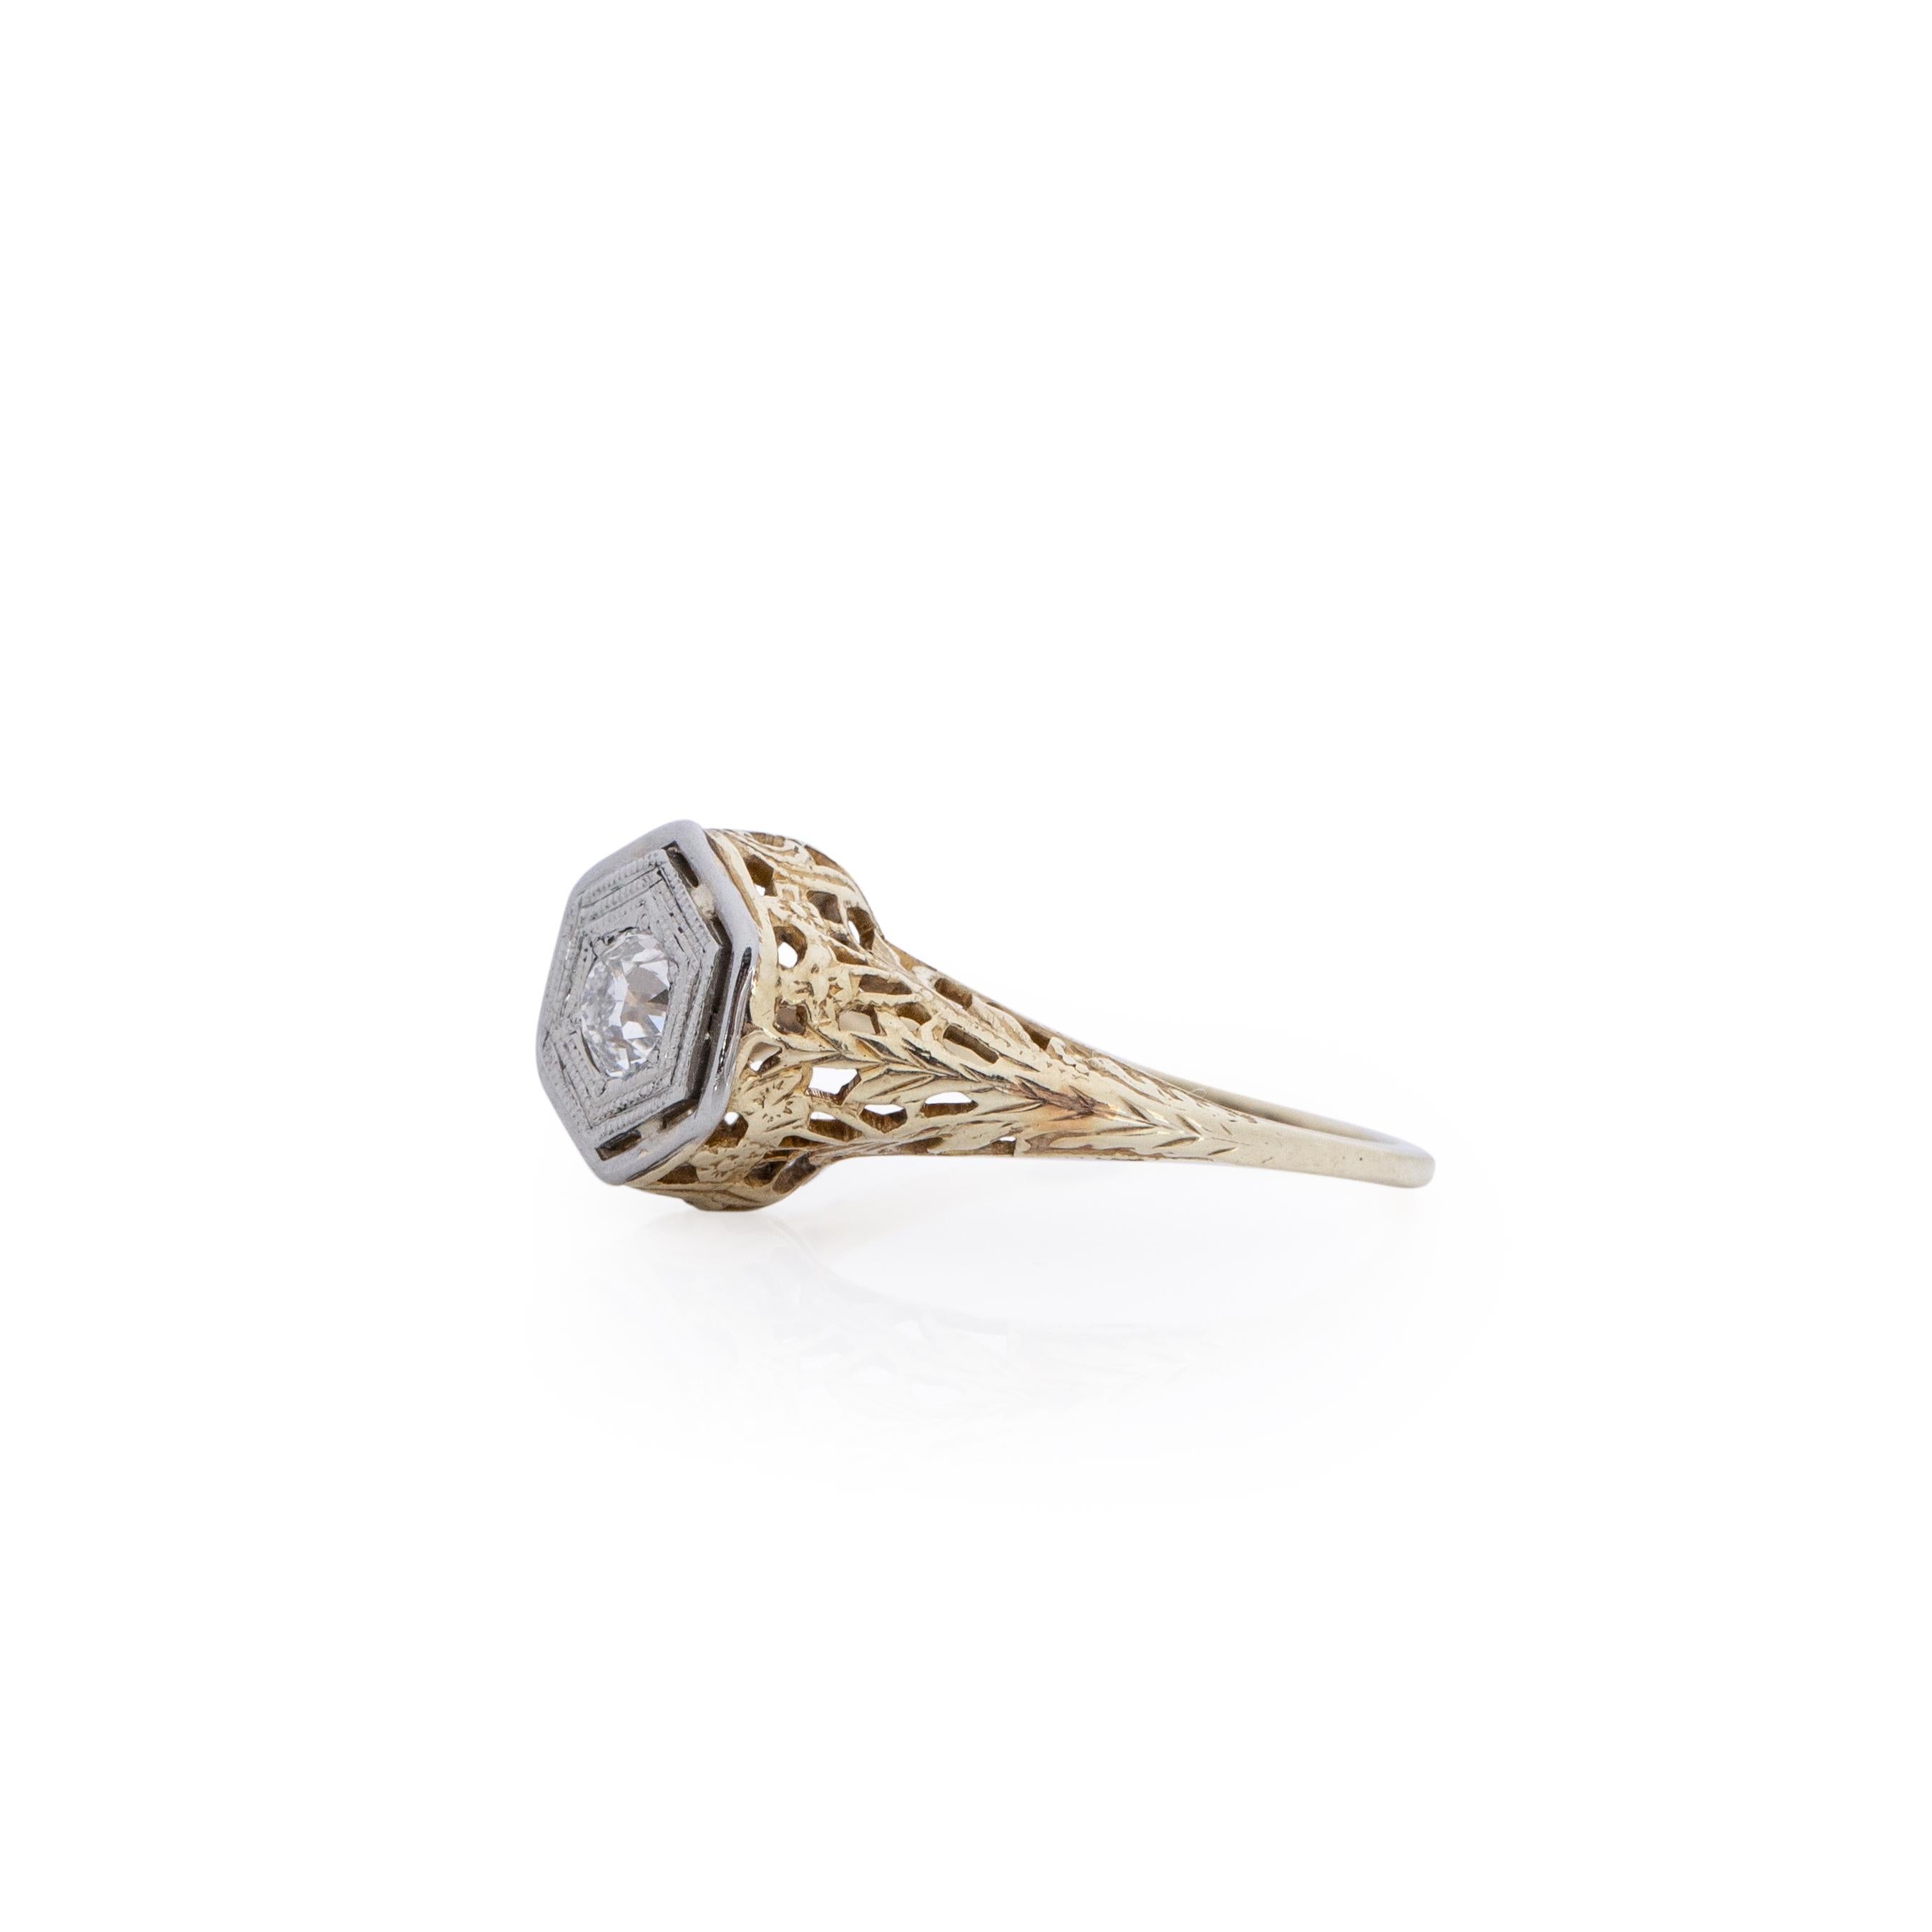 Here is a art deco solitaire filigree ring. A dainty and elegant classic. This ring is crafted in 14K yellow and white gold giving this piece a beautiful two tone affect. Along the yellow gold shanks is a intricate flora design of leaves, that wrap